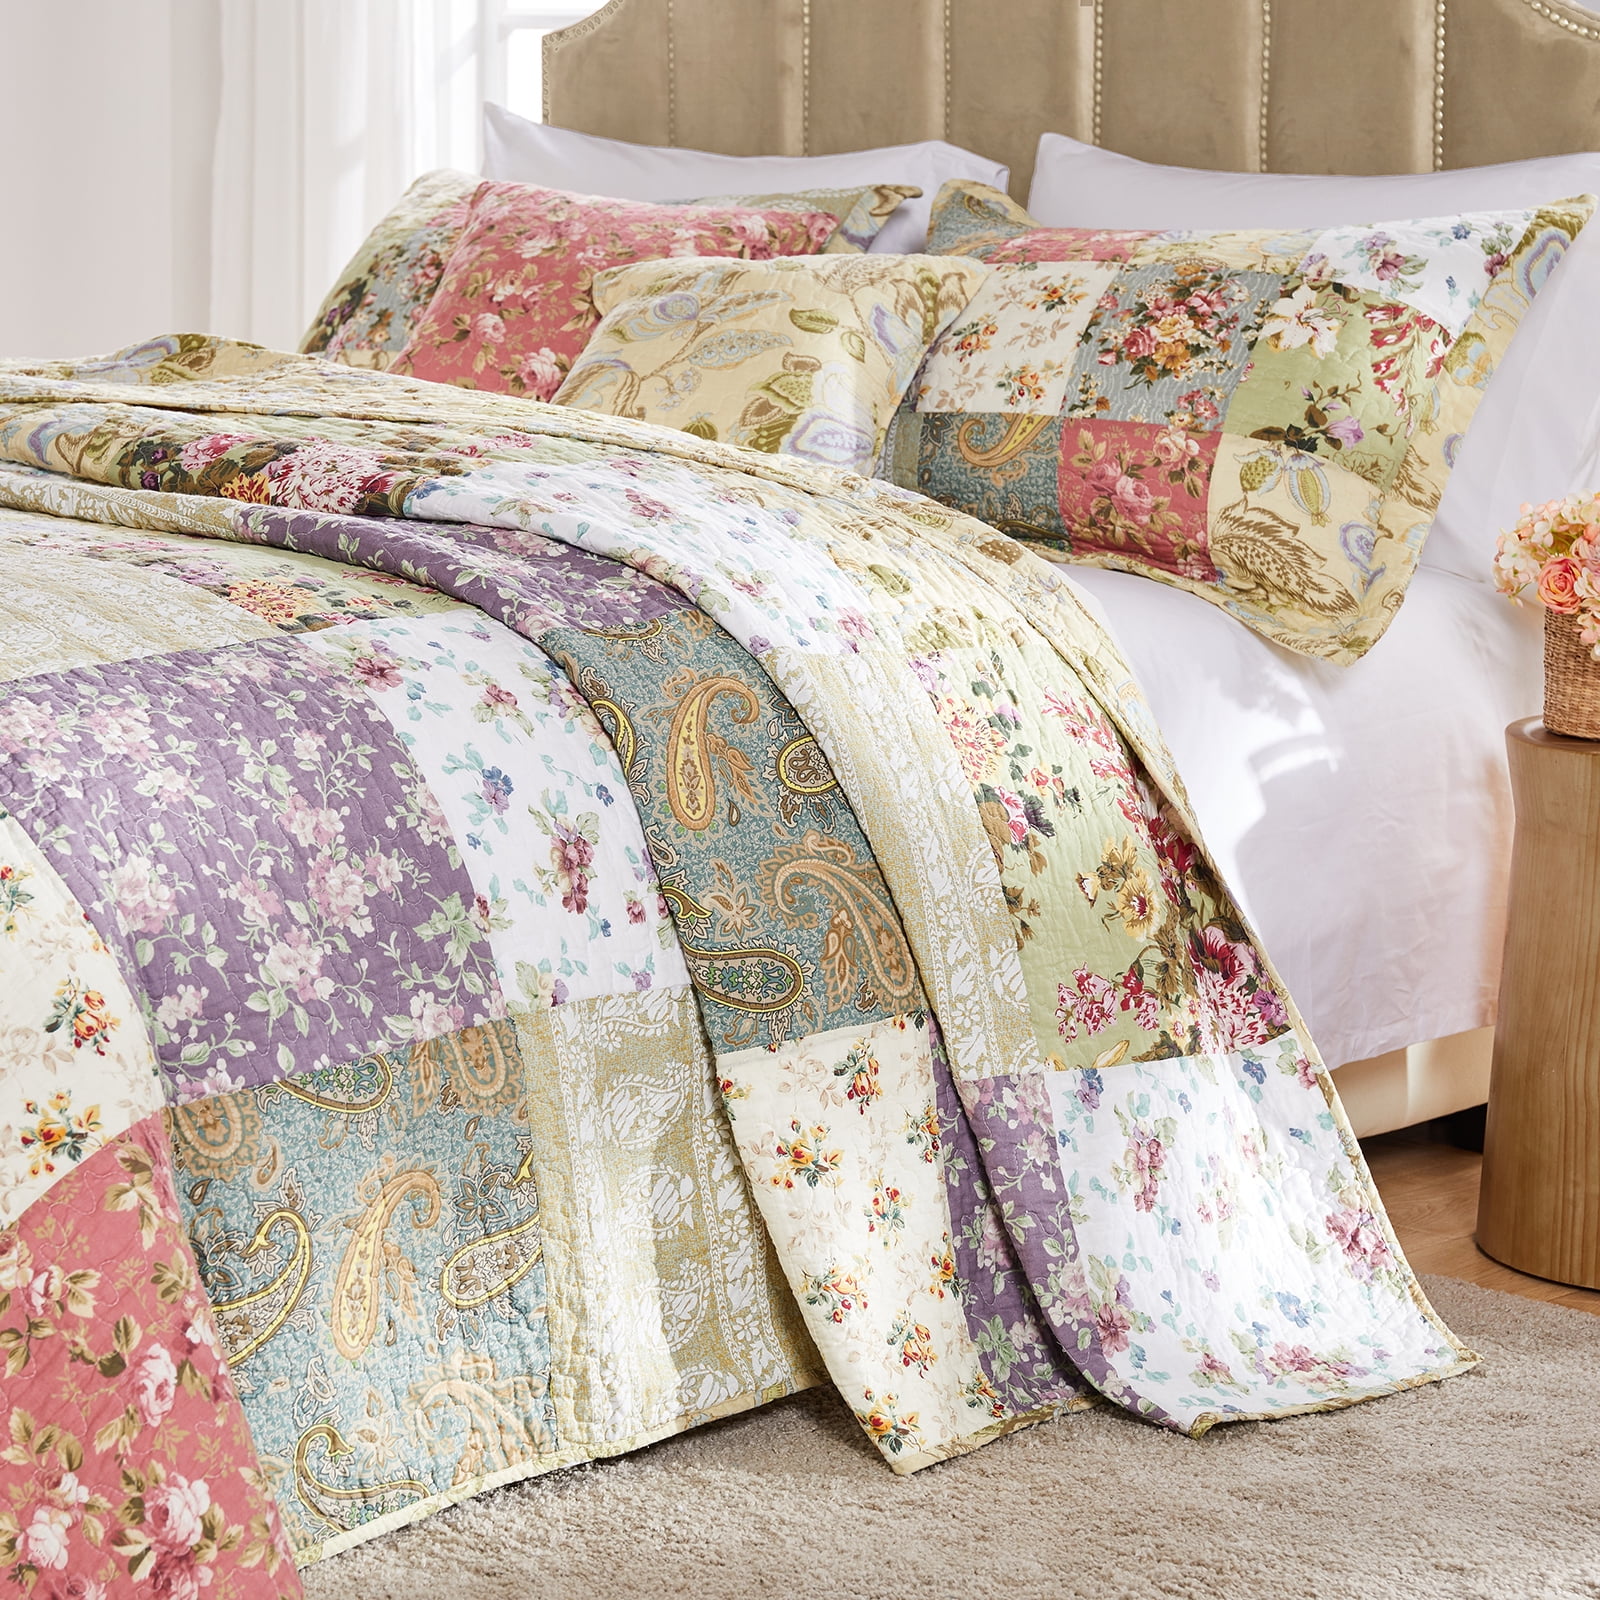 Wildlife Pattern Multi-Colored King/Queen Global Trends Timberline Quilt Set 